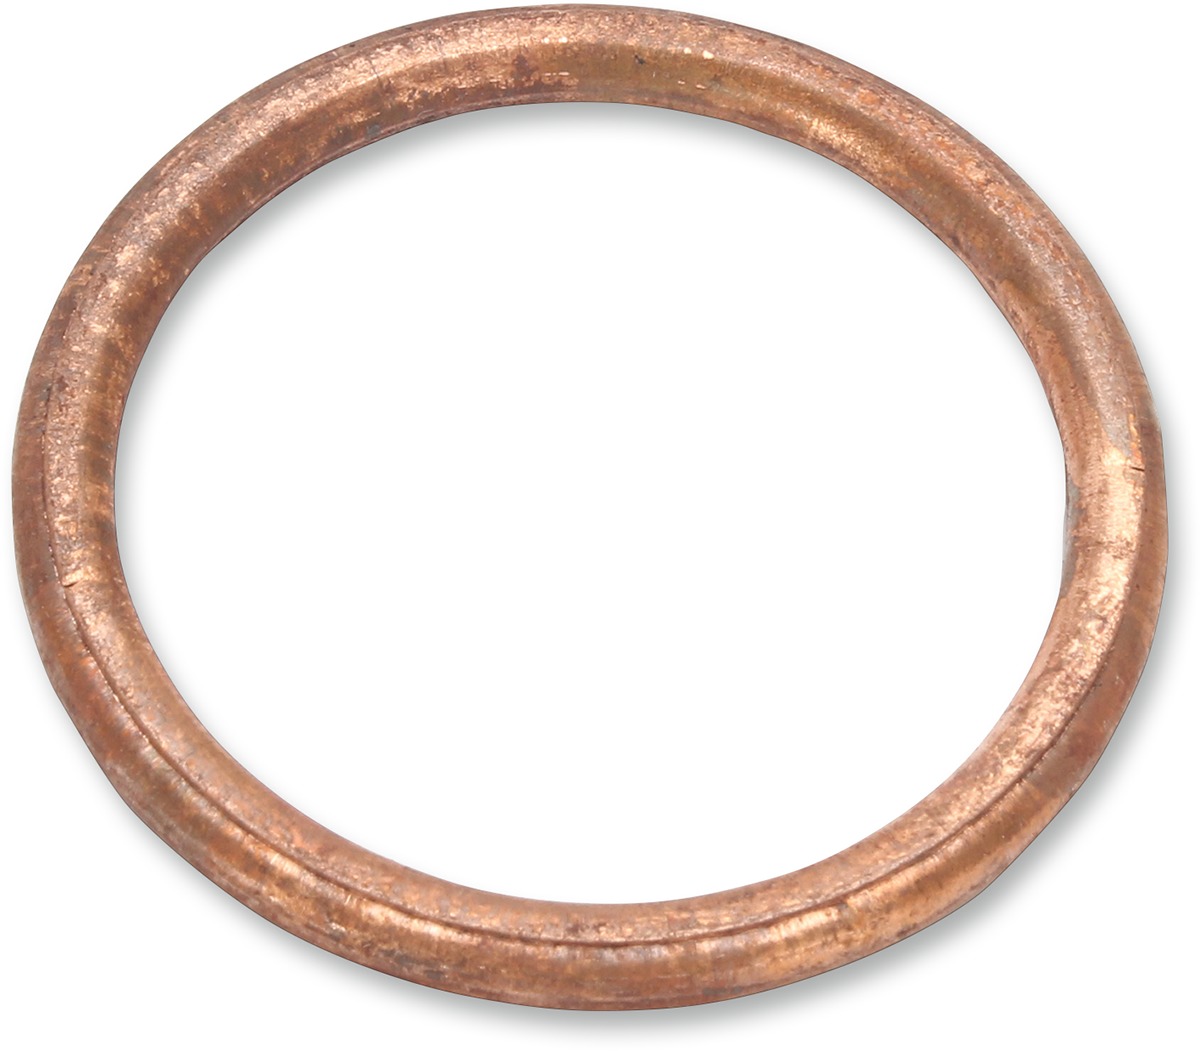 Exhaust Port Gasket - Replaces Honda 18291-MEB-670 - Click Image to Close